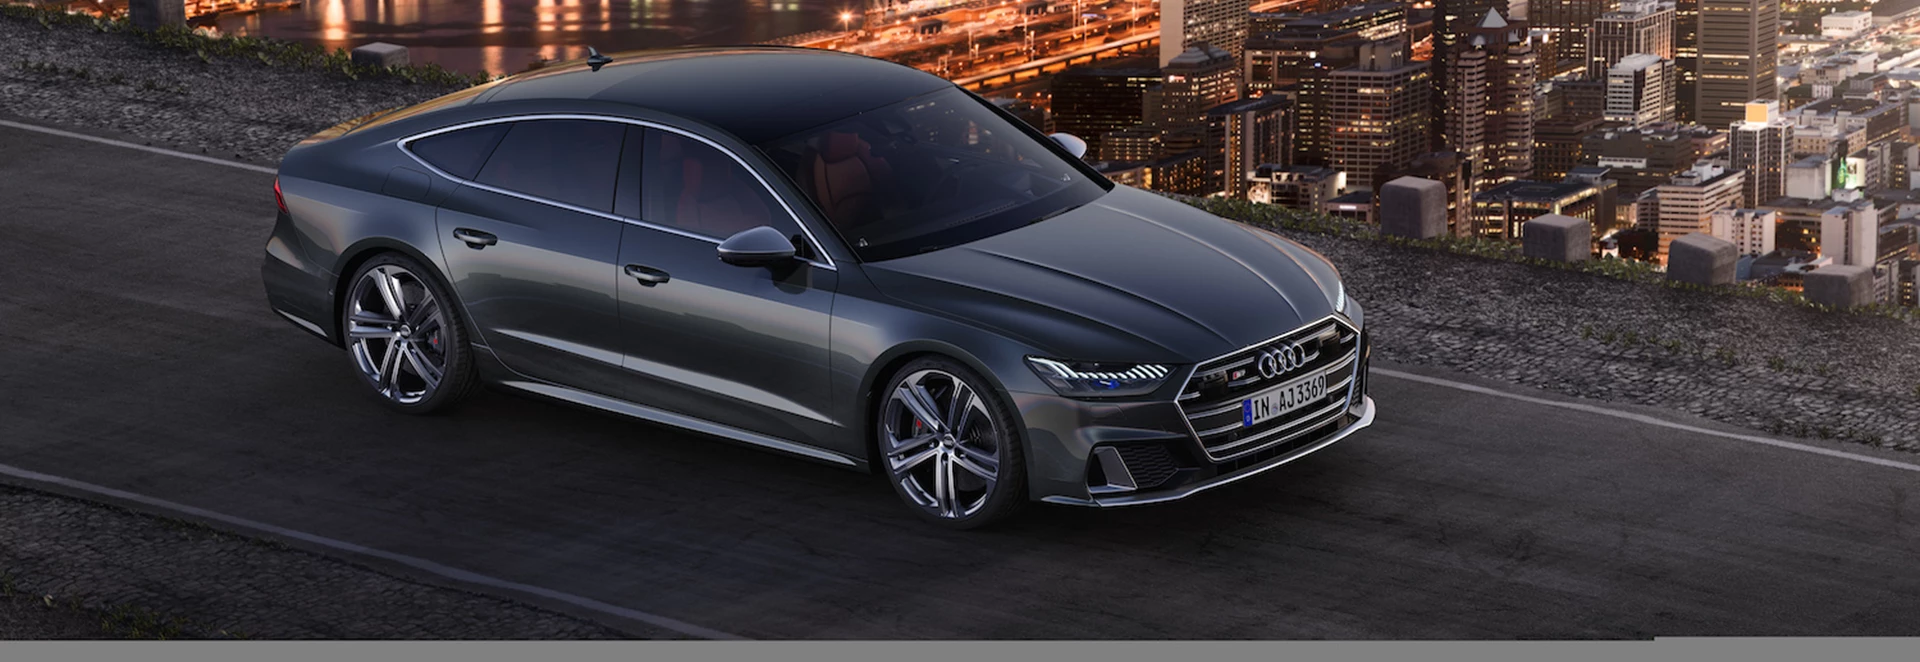 Audi reveals S6 and S7 TDI models with mild-hybrid diesel powertrains